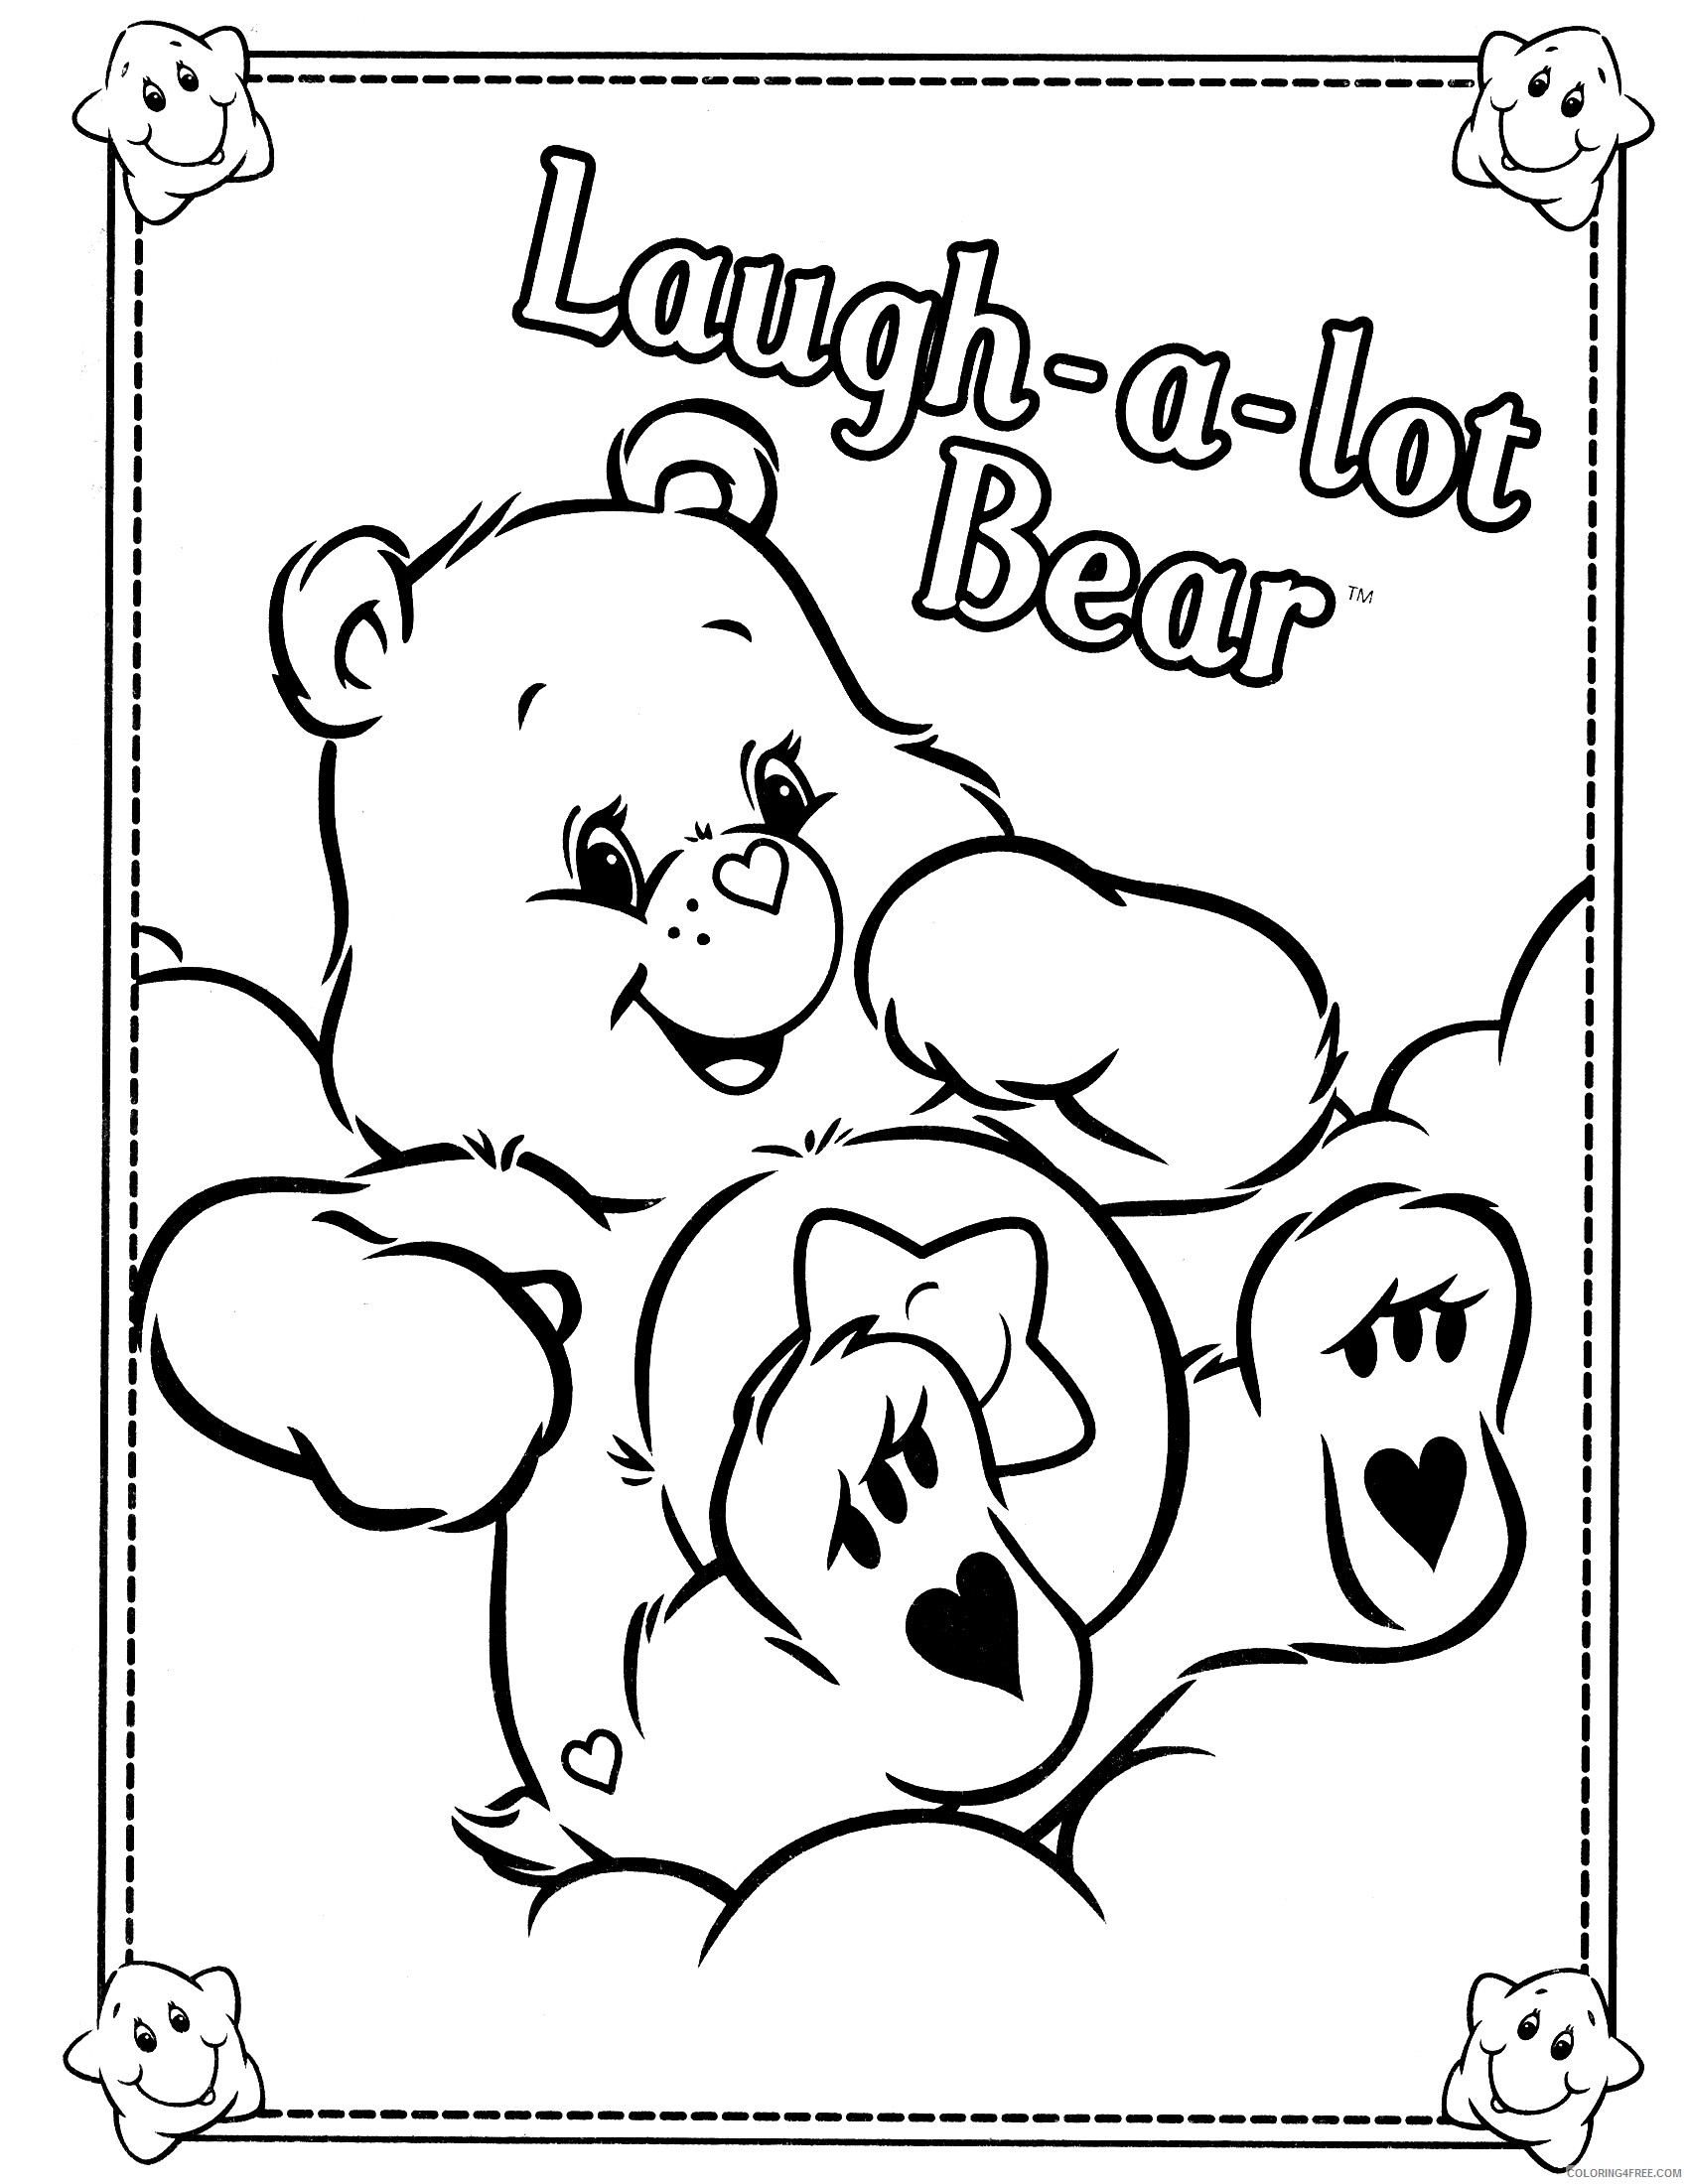 care bears coloring pages laugh a lot bear Coloring4free